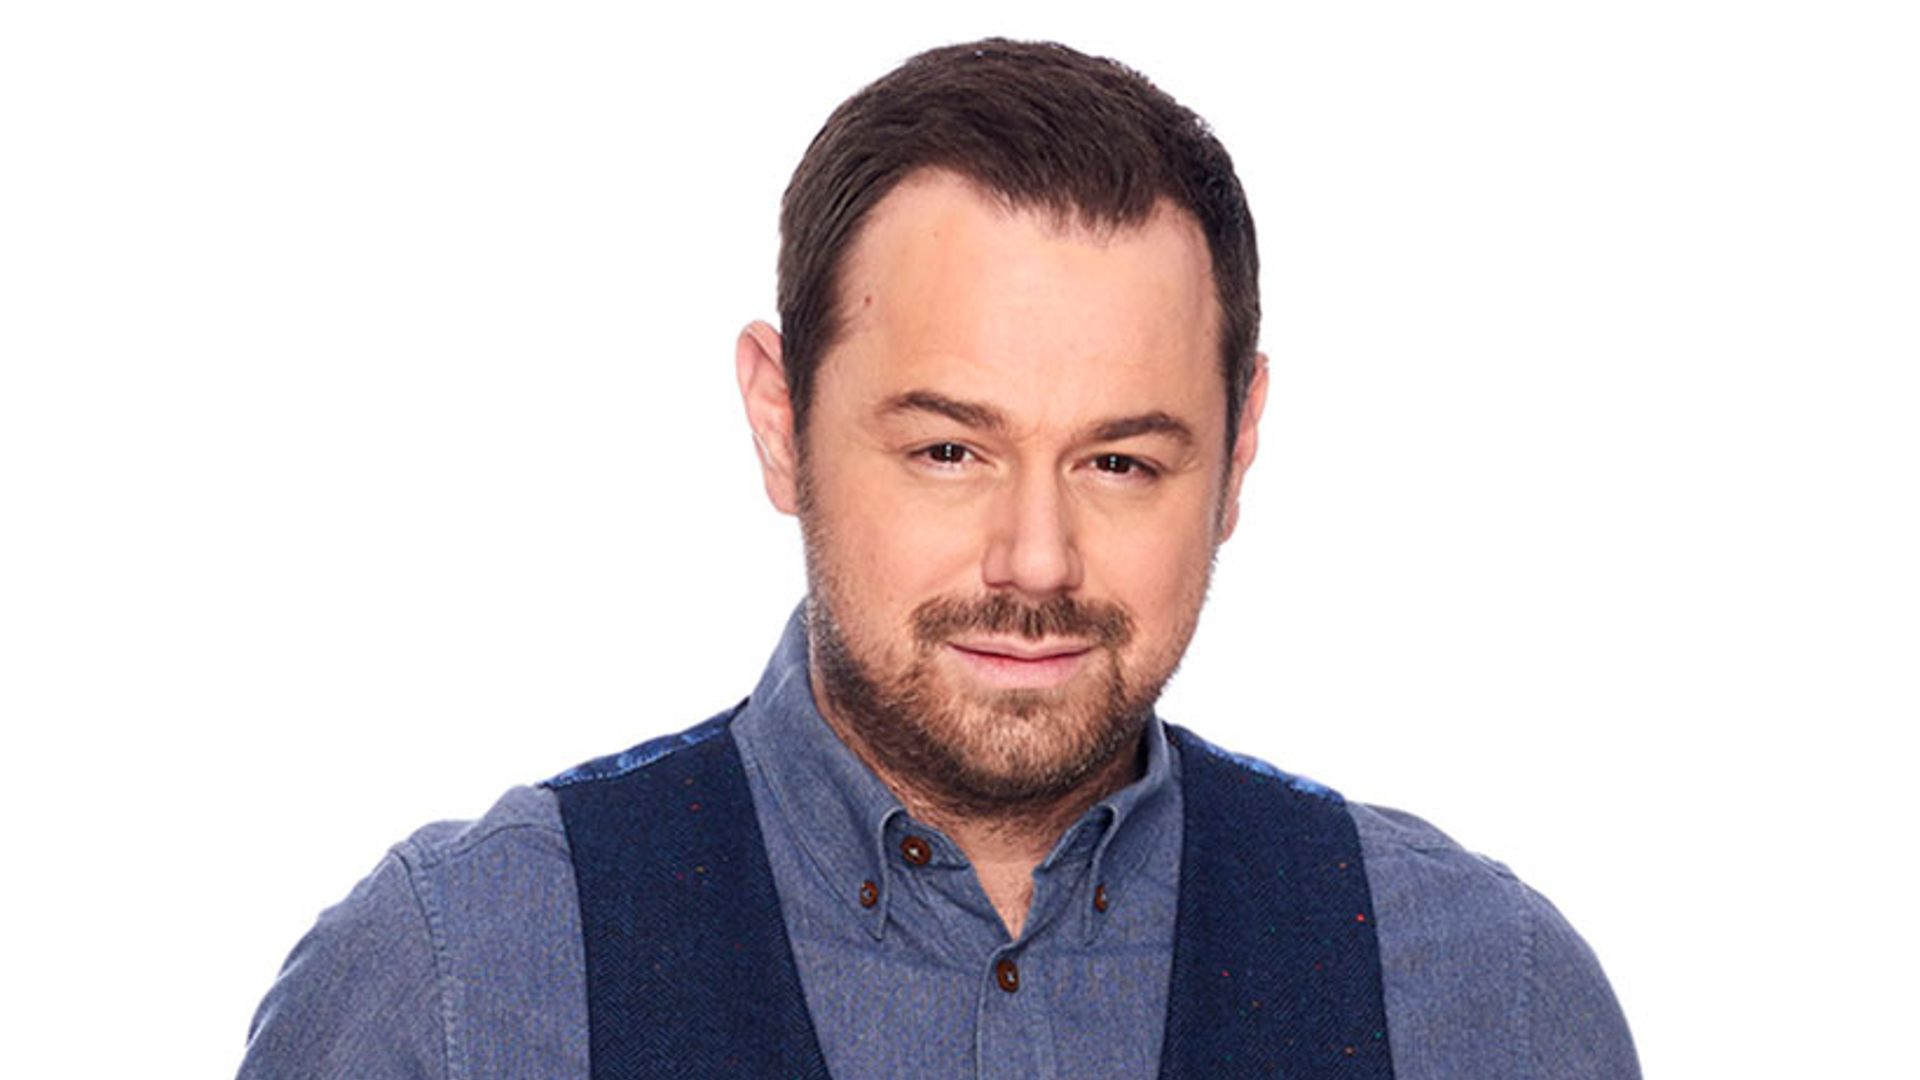 Danny Dyer to take six-week break from EastEnders - find out why